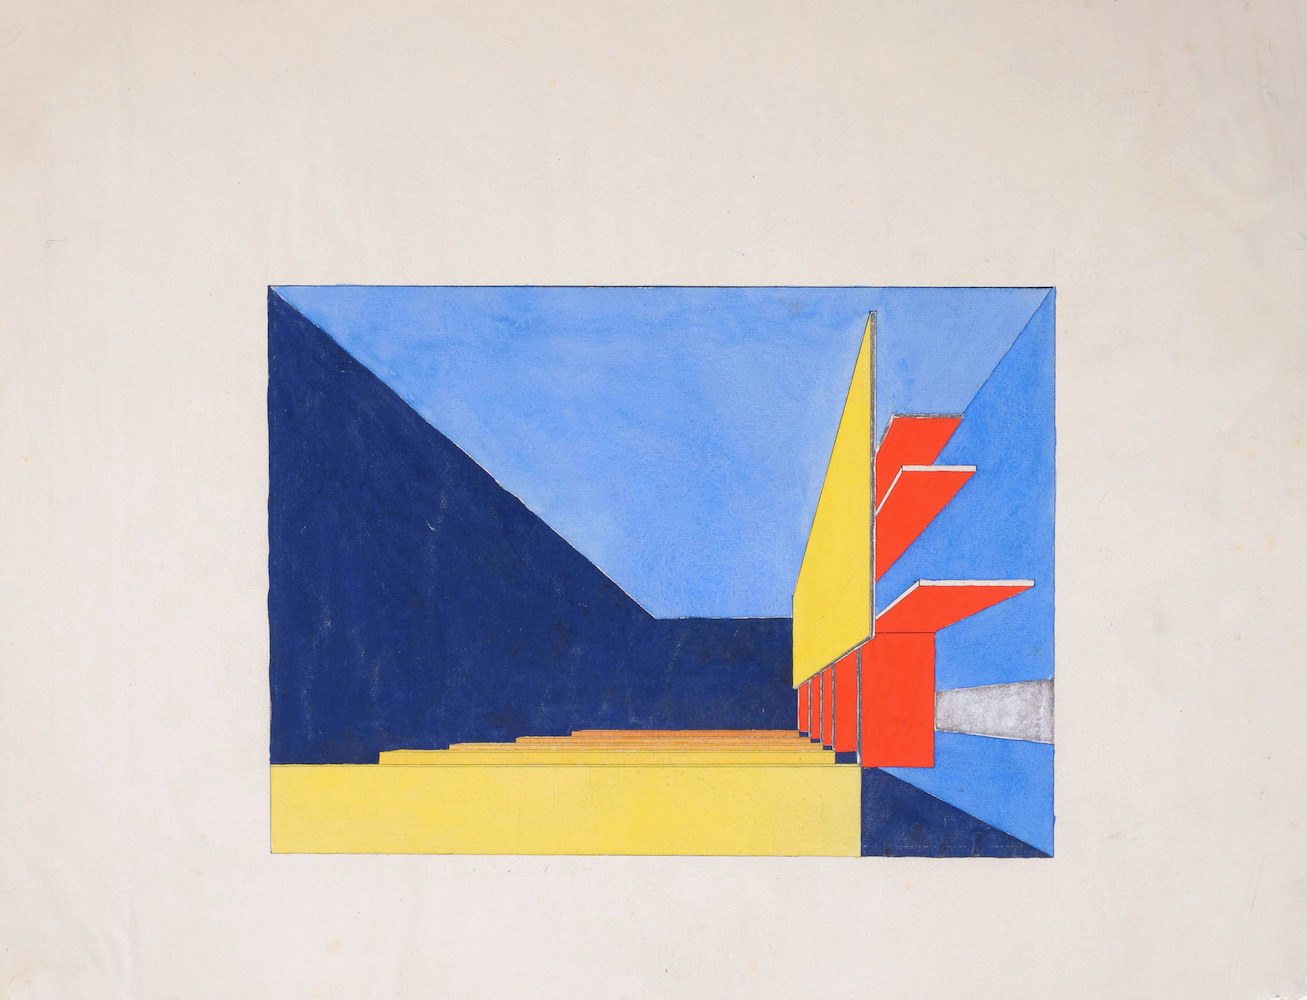 Stage construction. Space in blue, yellow and red